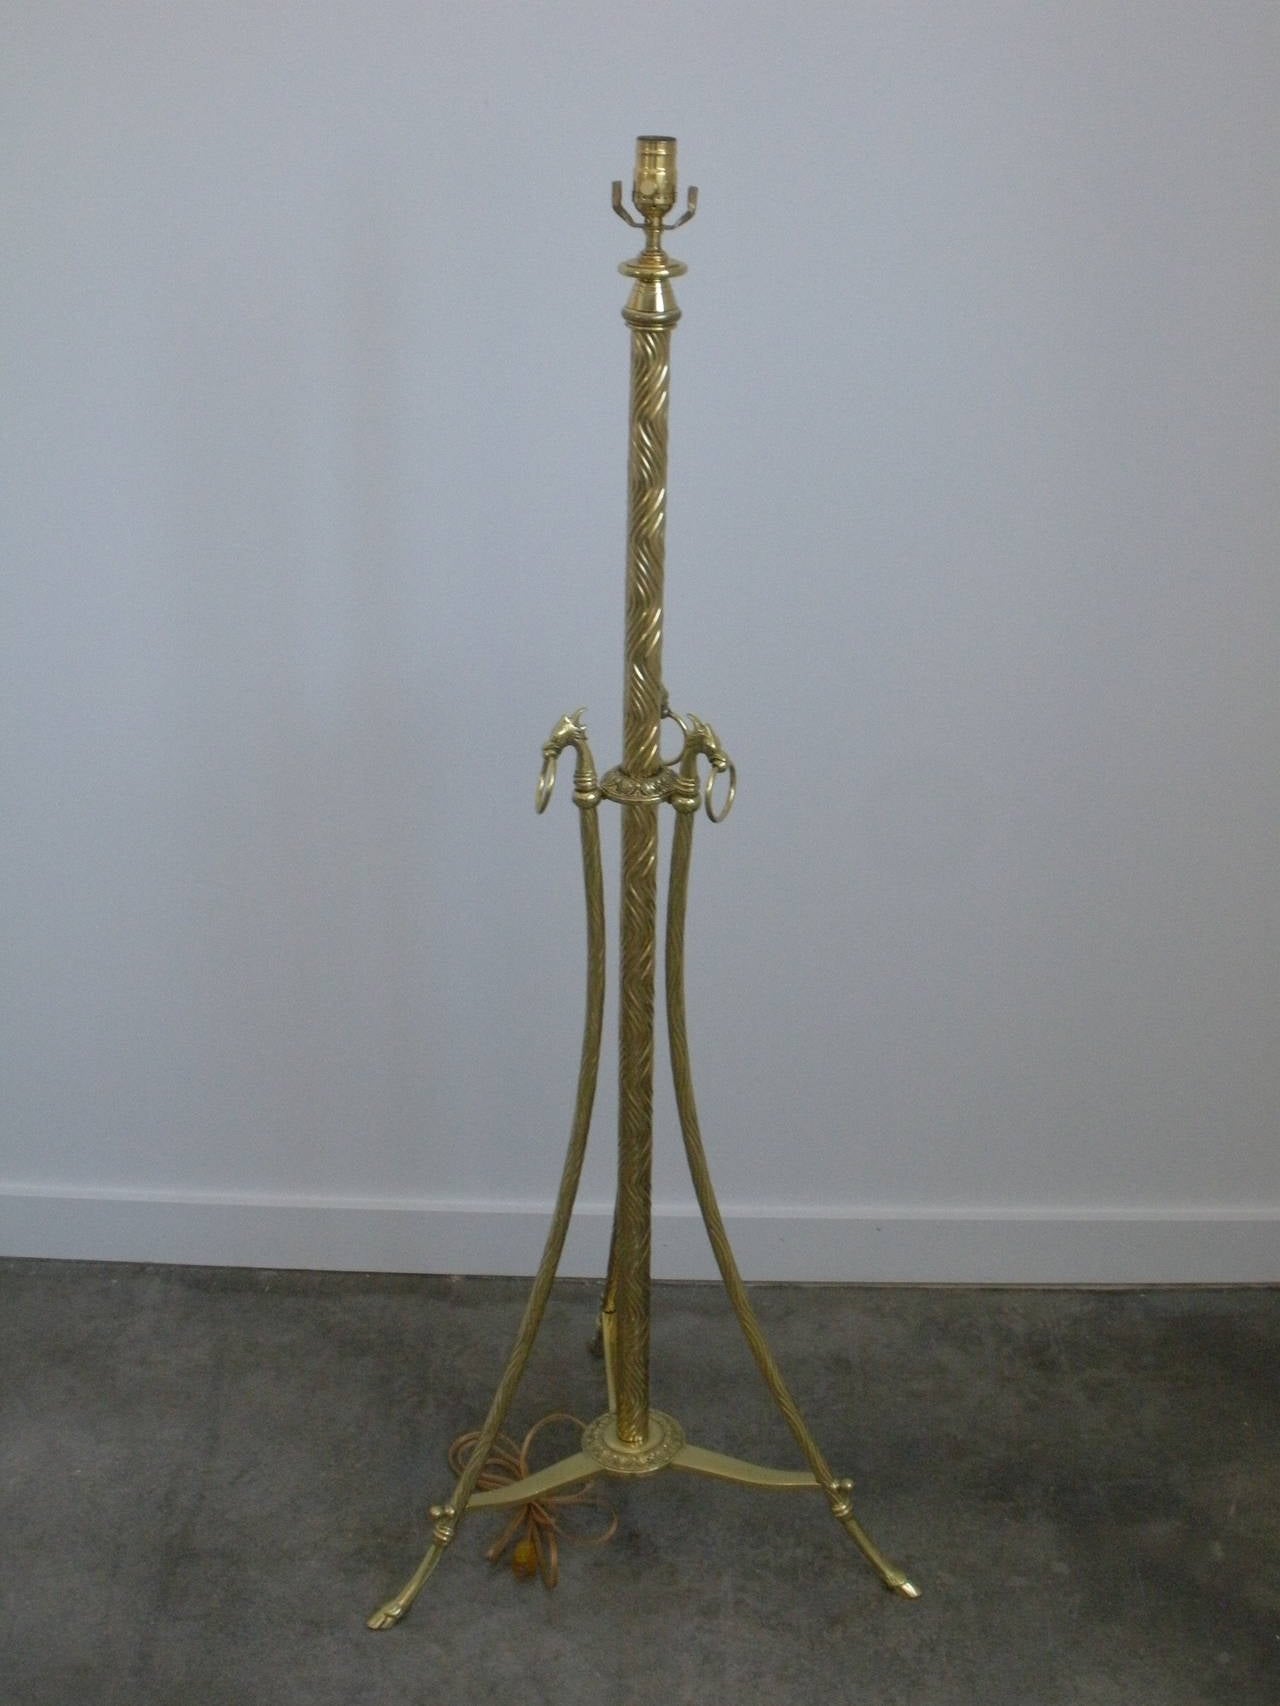 Spectacular detail and highly polished 1940s solid brass floor lamp with intricate wave and dragon motif.